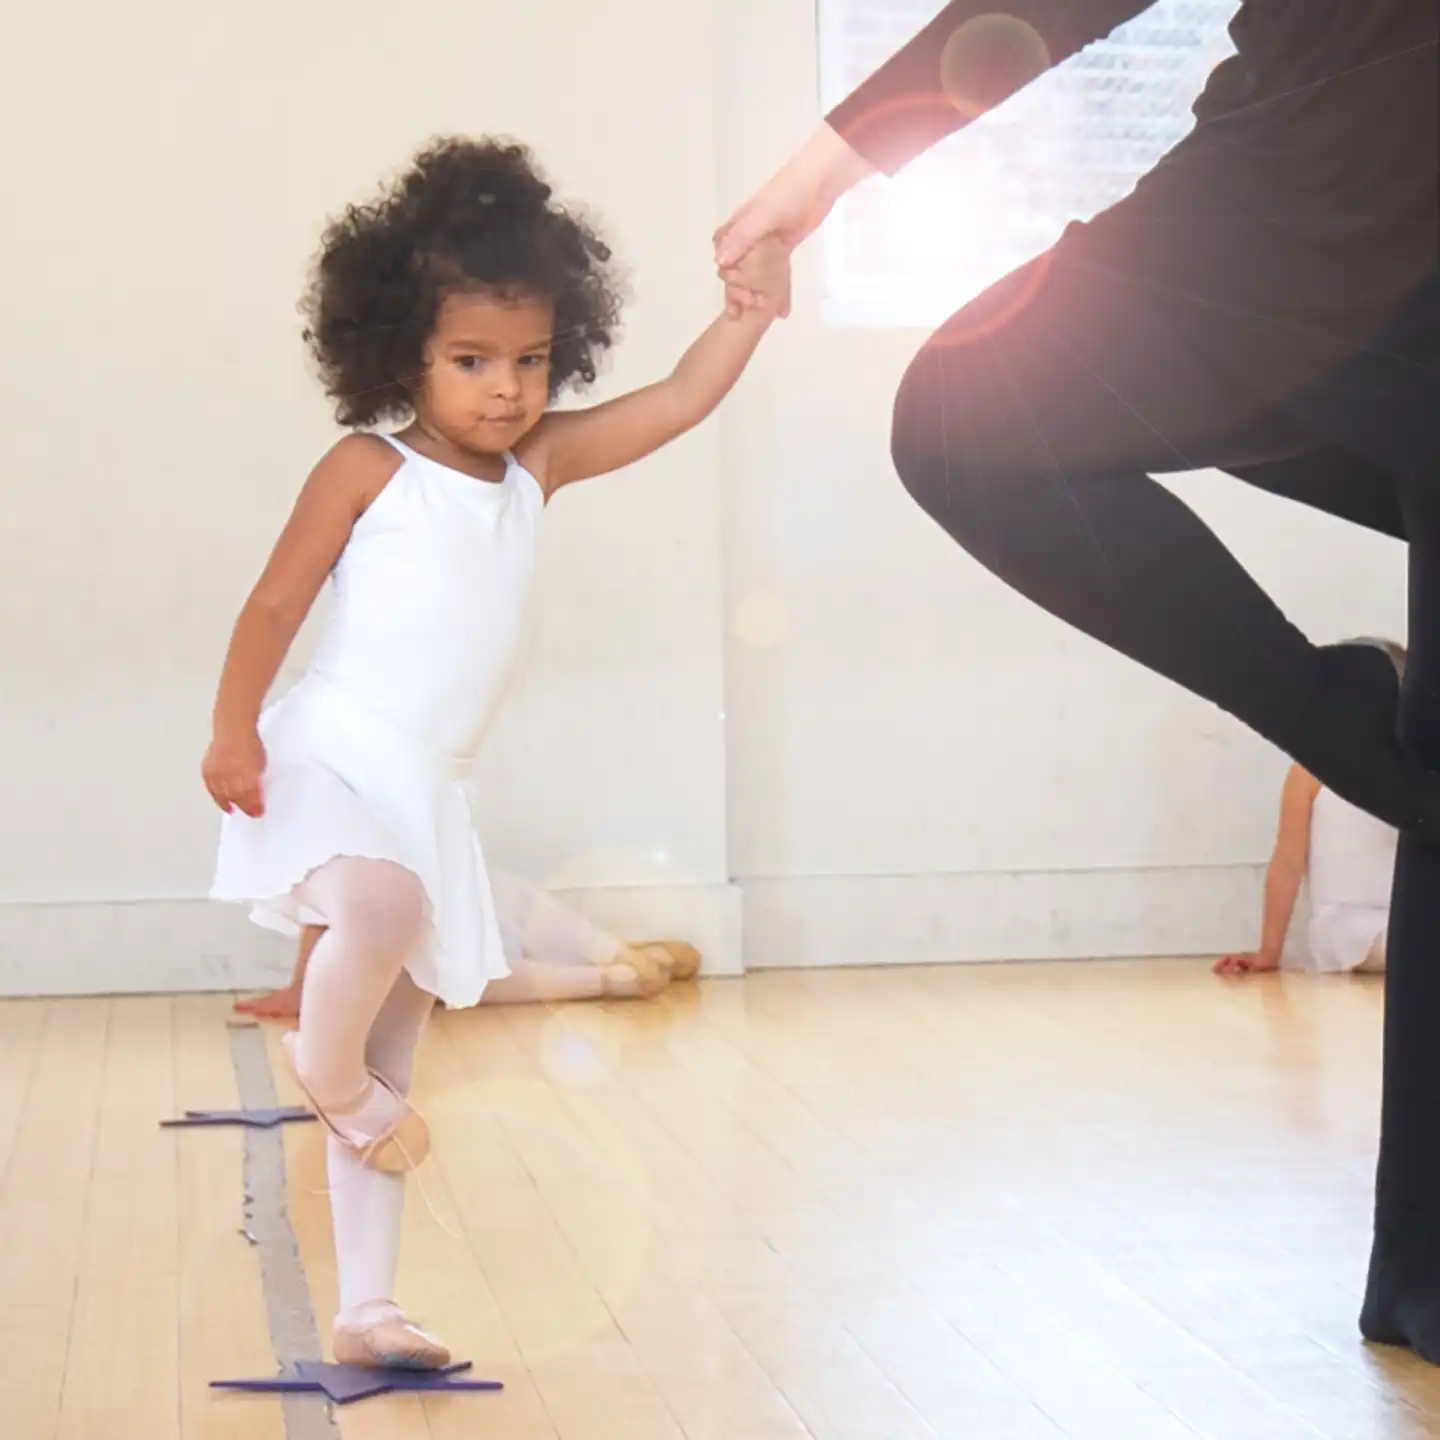 ballet dancer doing a passé while holding their grown up's hand in dance class